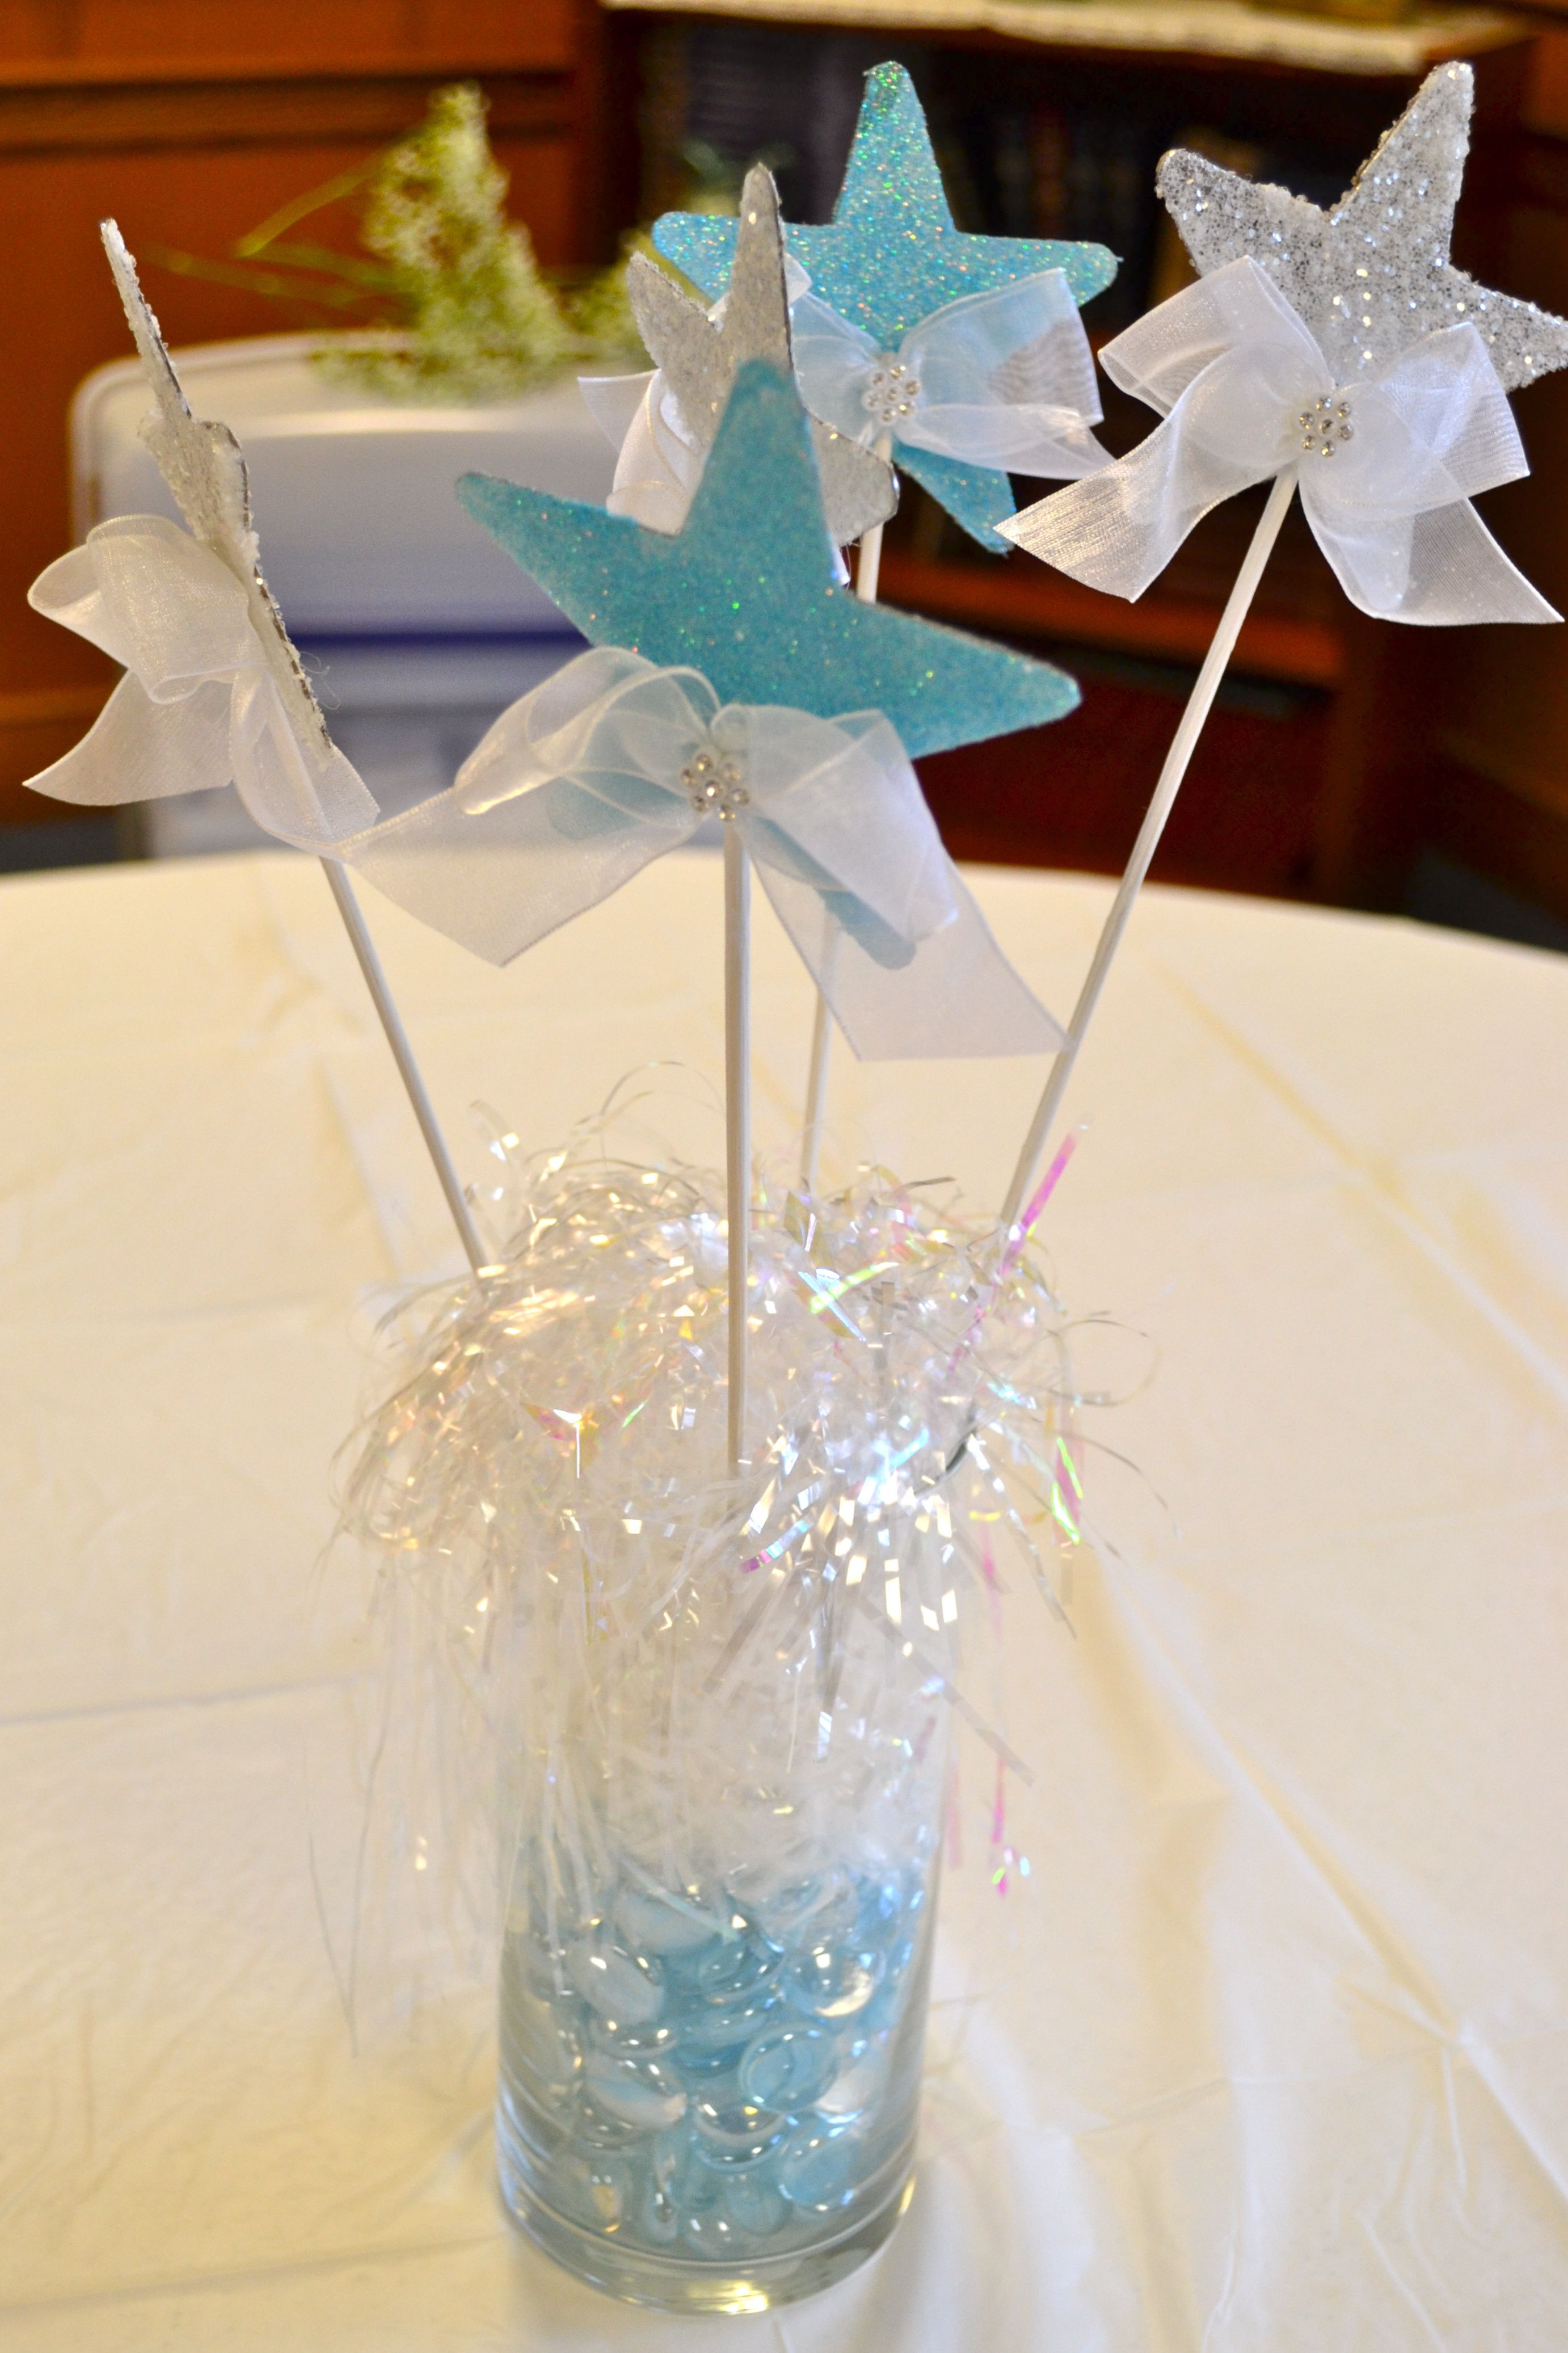 blue glass vase filler of little star centerpieces empty glass vase filled with silver with regard to little star centerpieces empty glass vase filled with silver white and blue shiny stuff attach stars to sticks and put them in vase